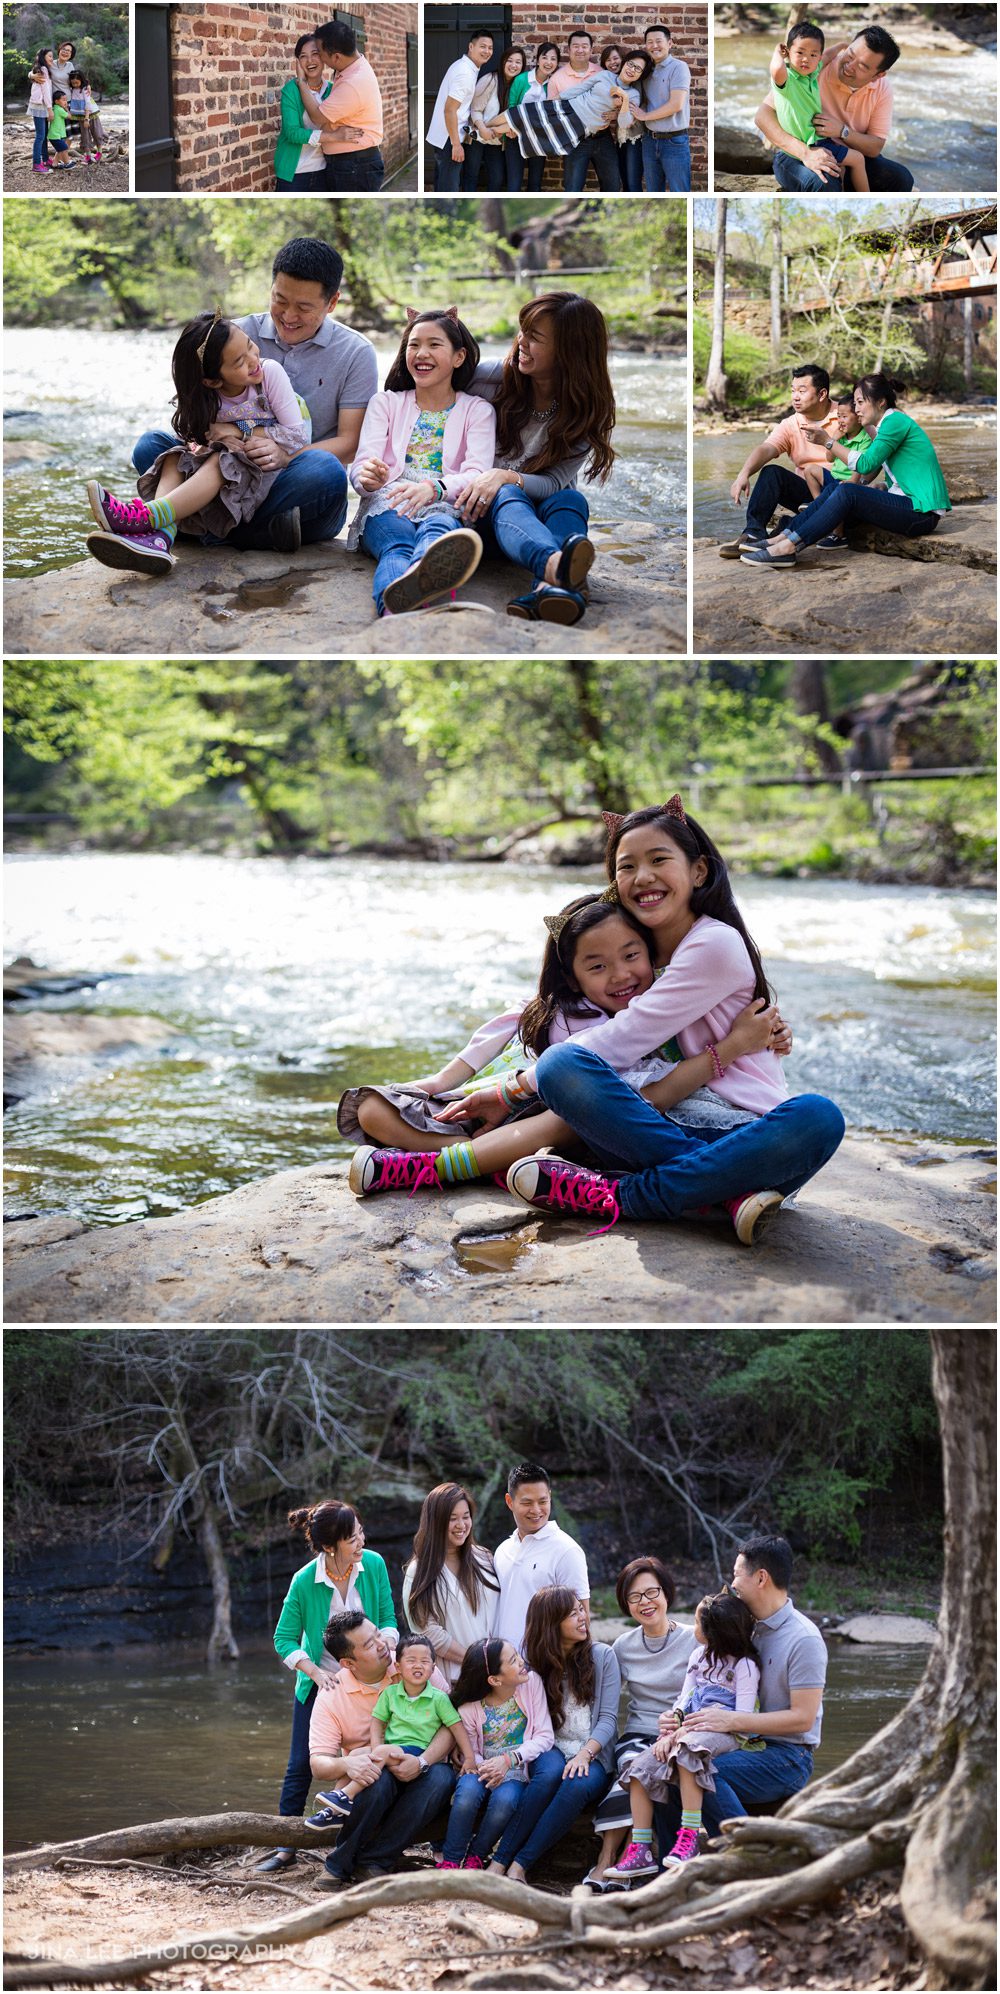 Jina Lee Photography | Roswell Family Photographer